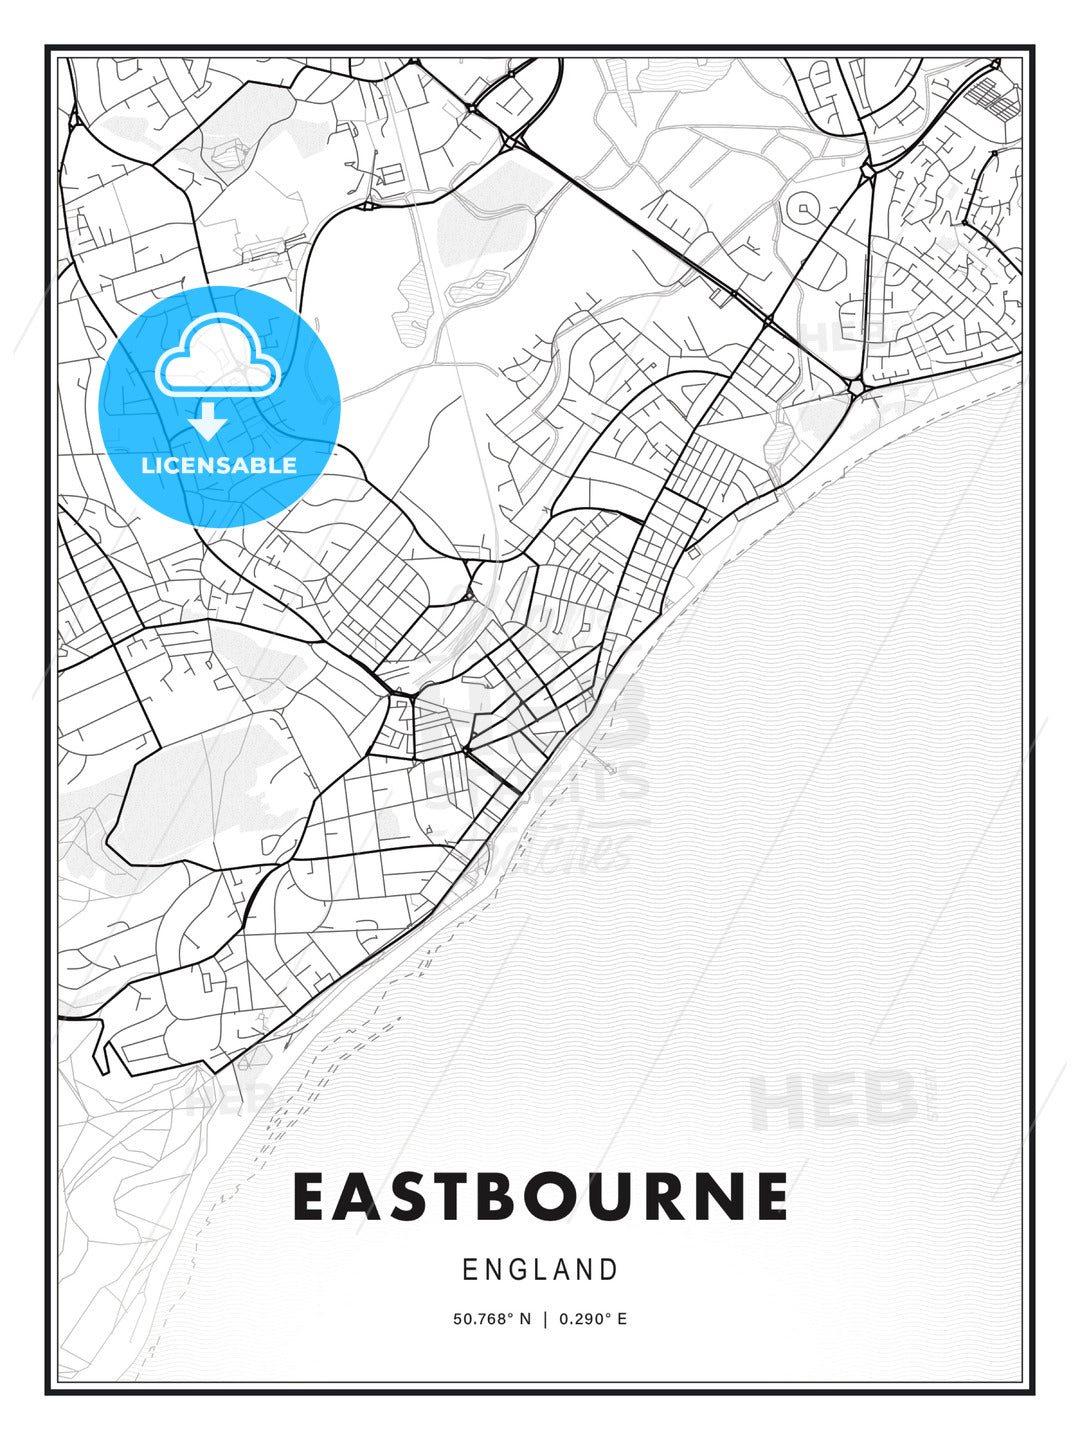 Eastbourne, England, Modern Print Template in Various Formats - HEBSTREITS Sketches